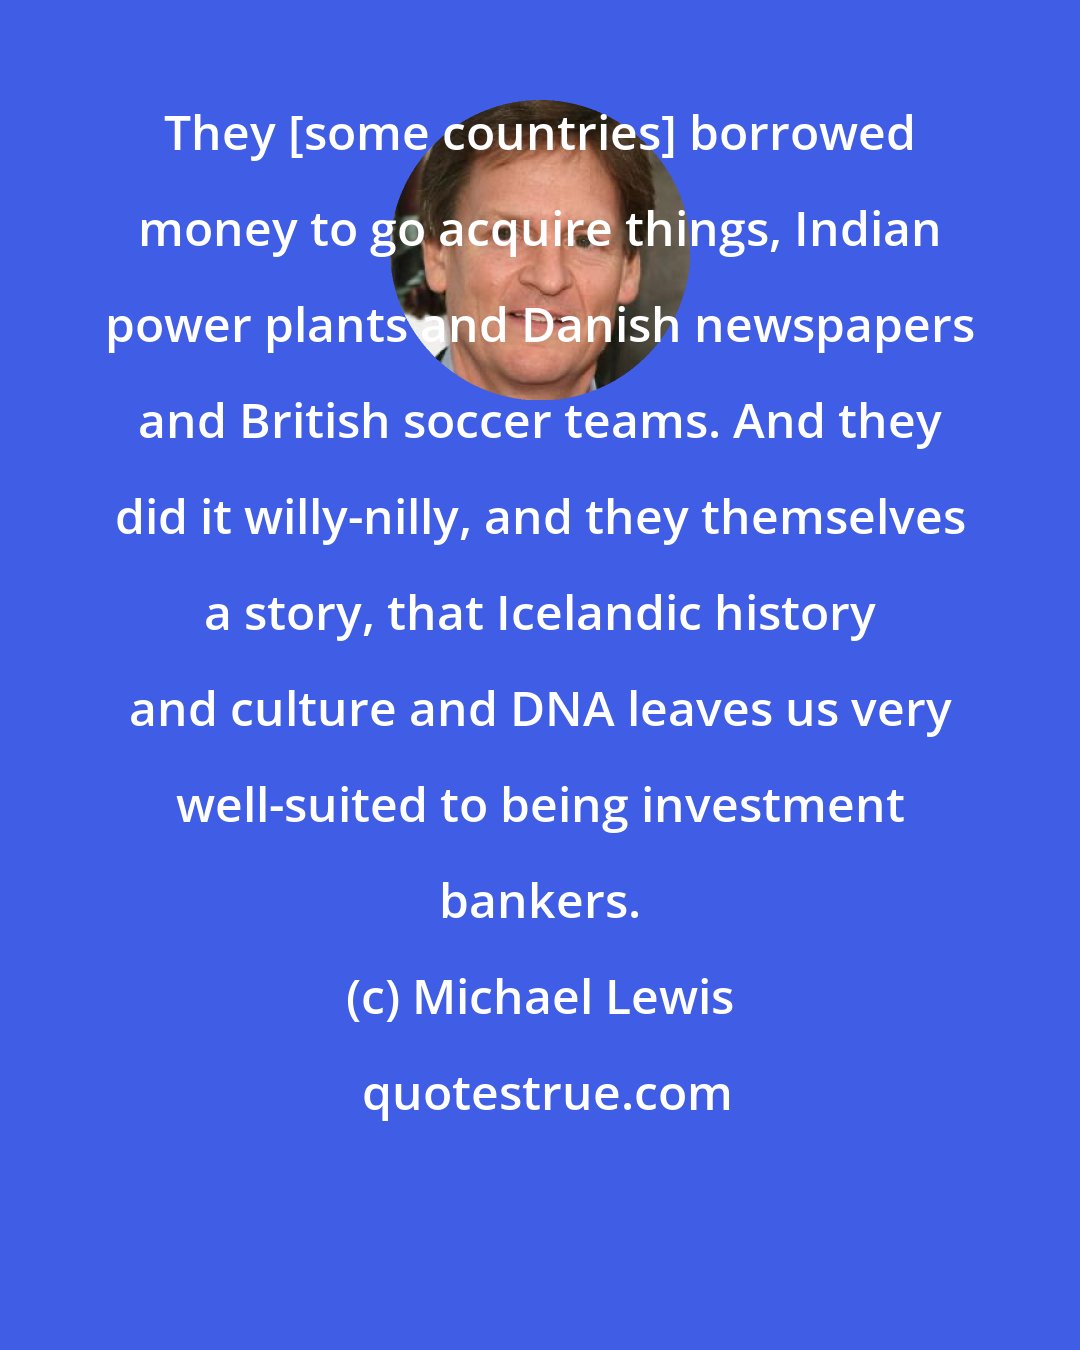 Michael Lewis: They [some countries] borrowed money to go acquire things, Indian power plants and Danish newspapers and British soccer teams. And they did it willy-nilly, and they themselves a story, that Icelandic history and culture and DNA leaves us very well-suited to being investment bankers.